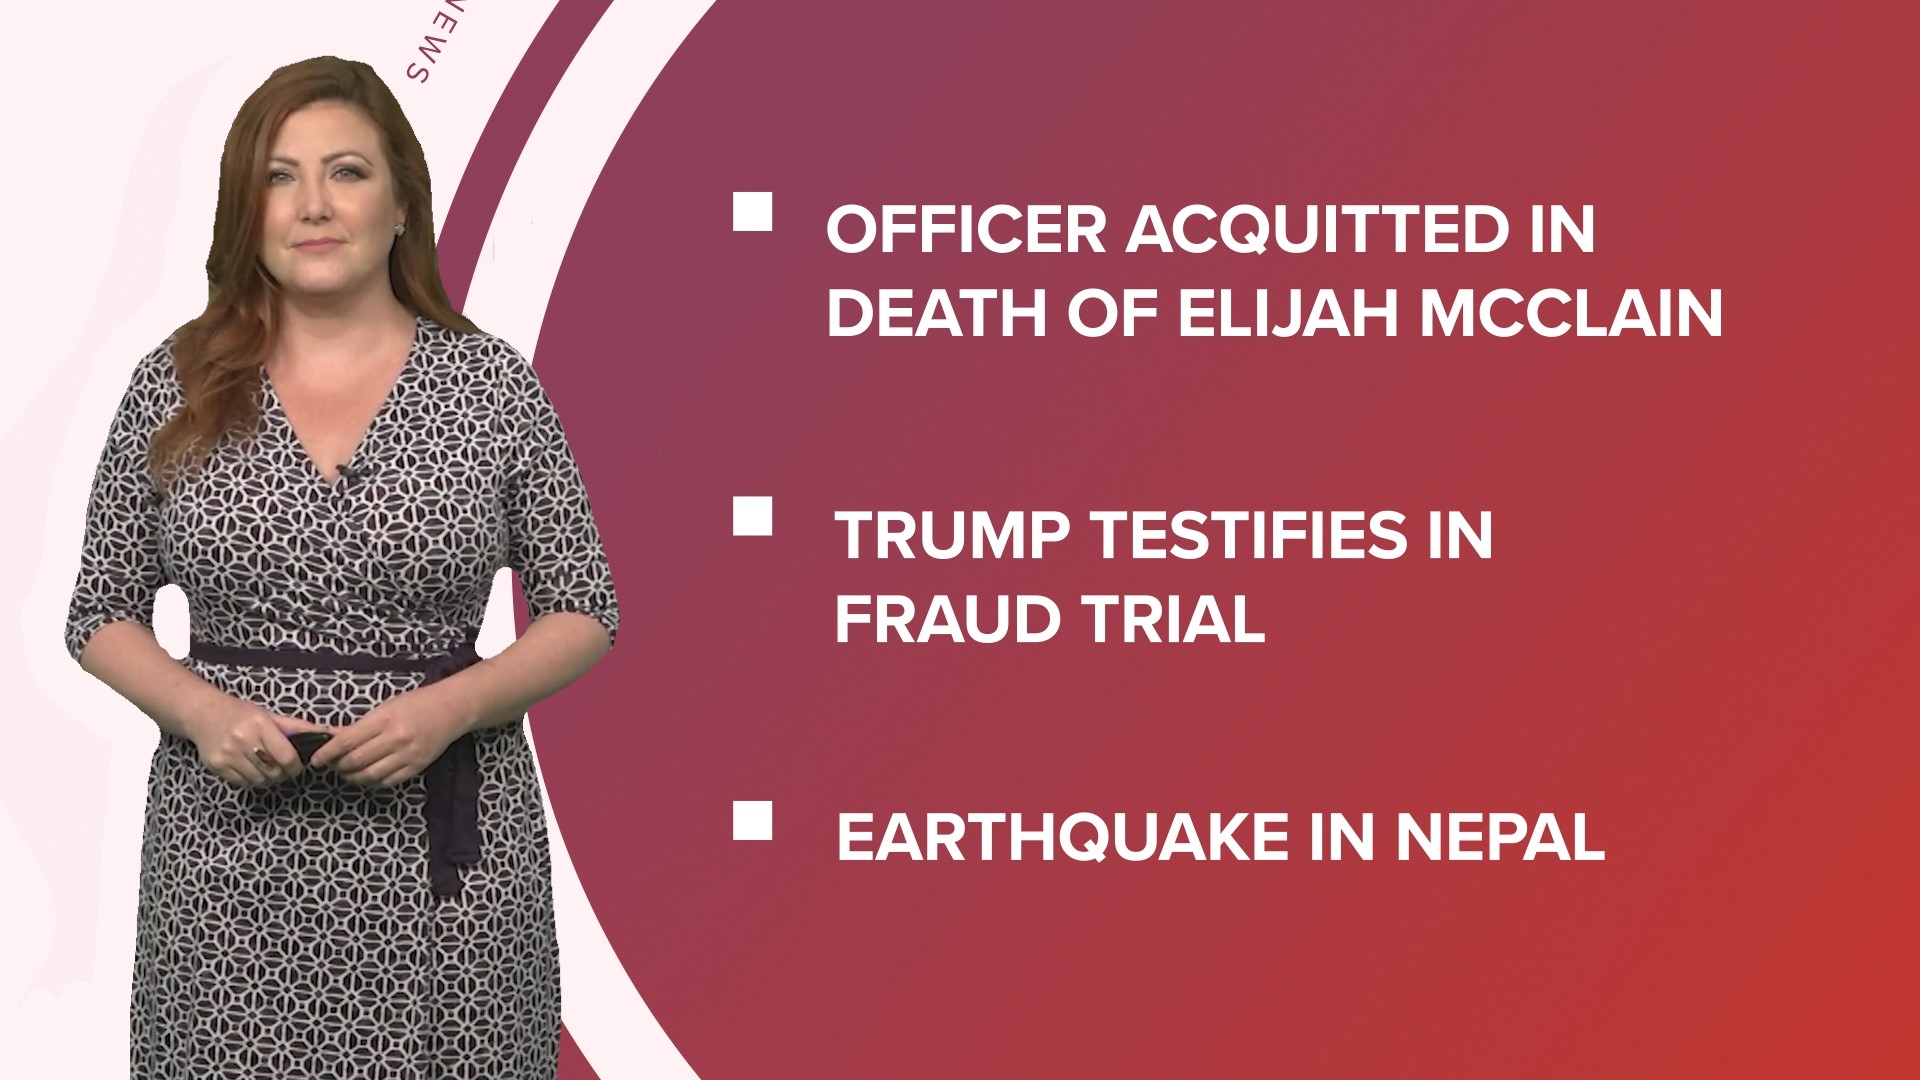 A look at what is happening in the news from a second officer acquitted in Elijah McClain's death to Trump testifies in his civil fraud trial.